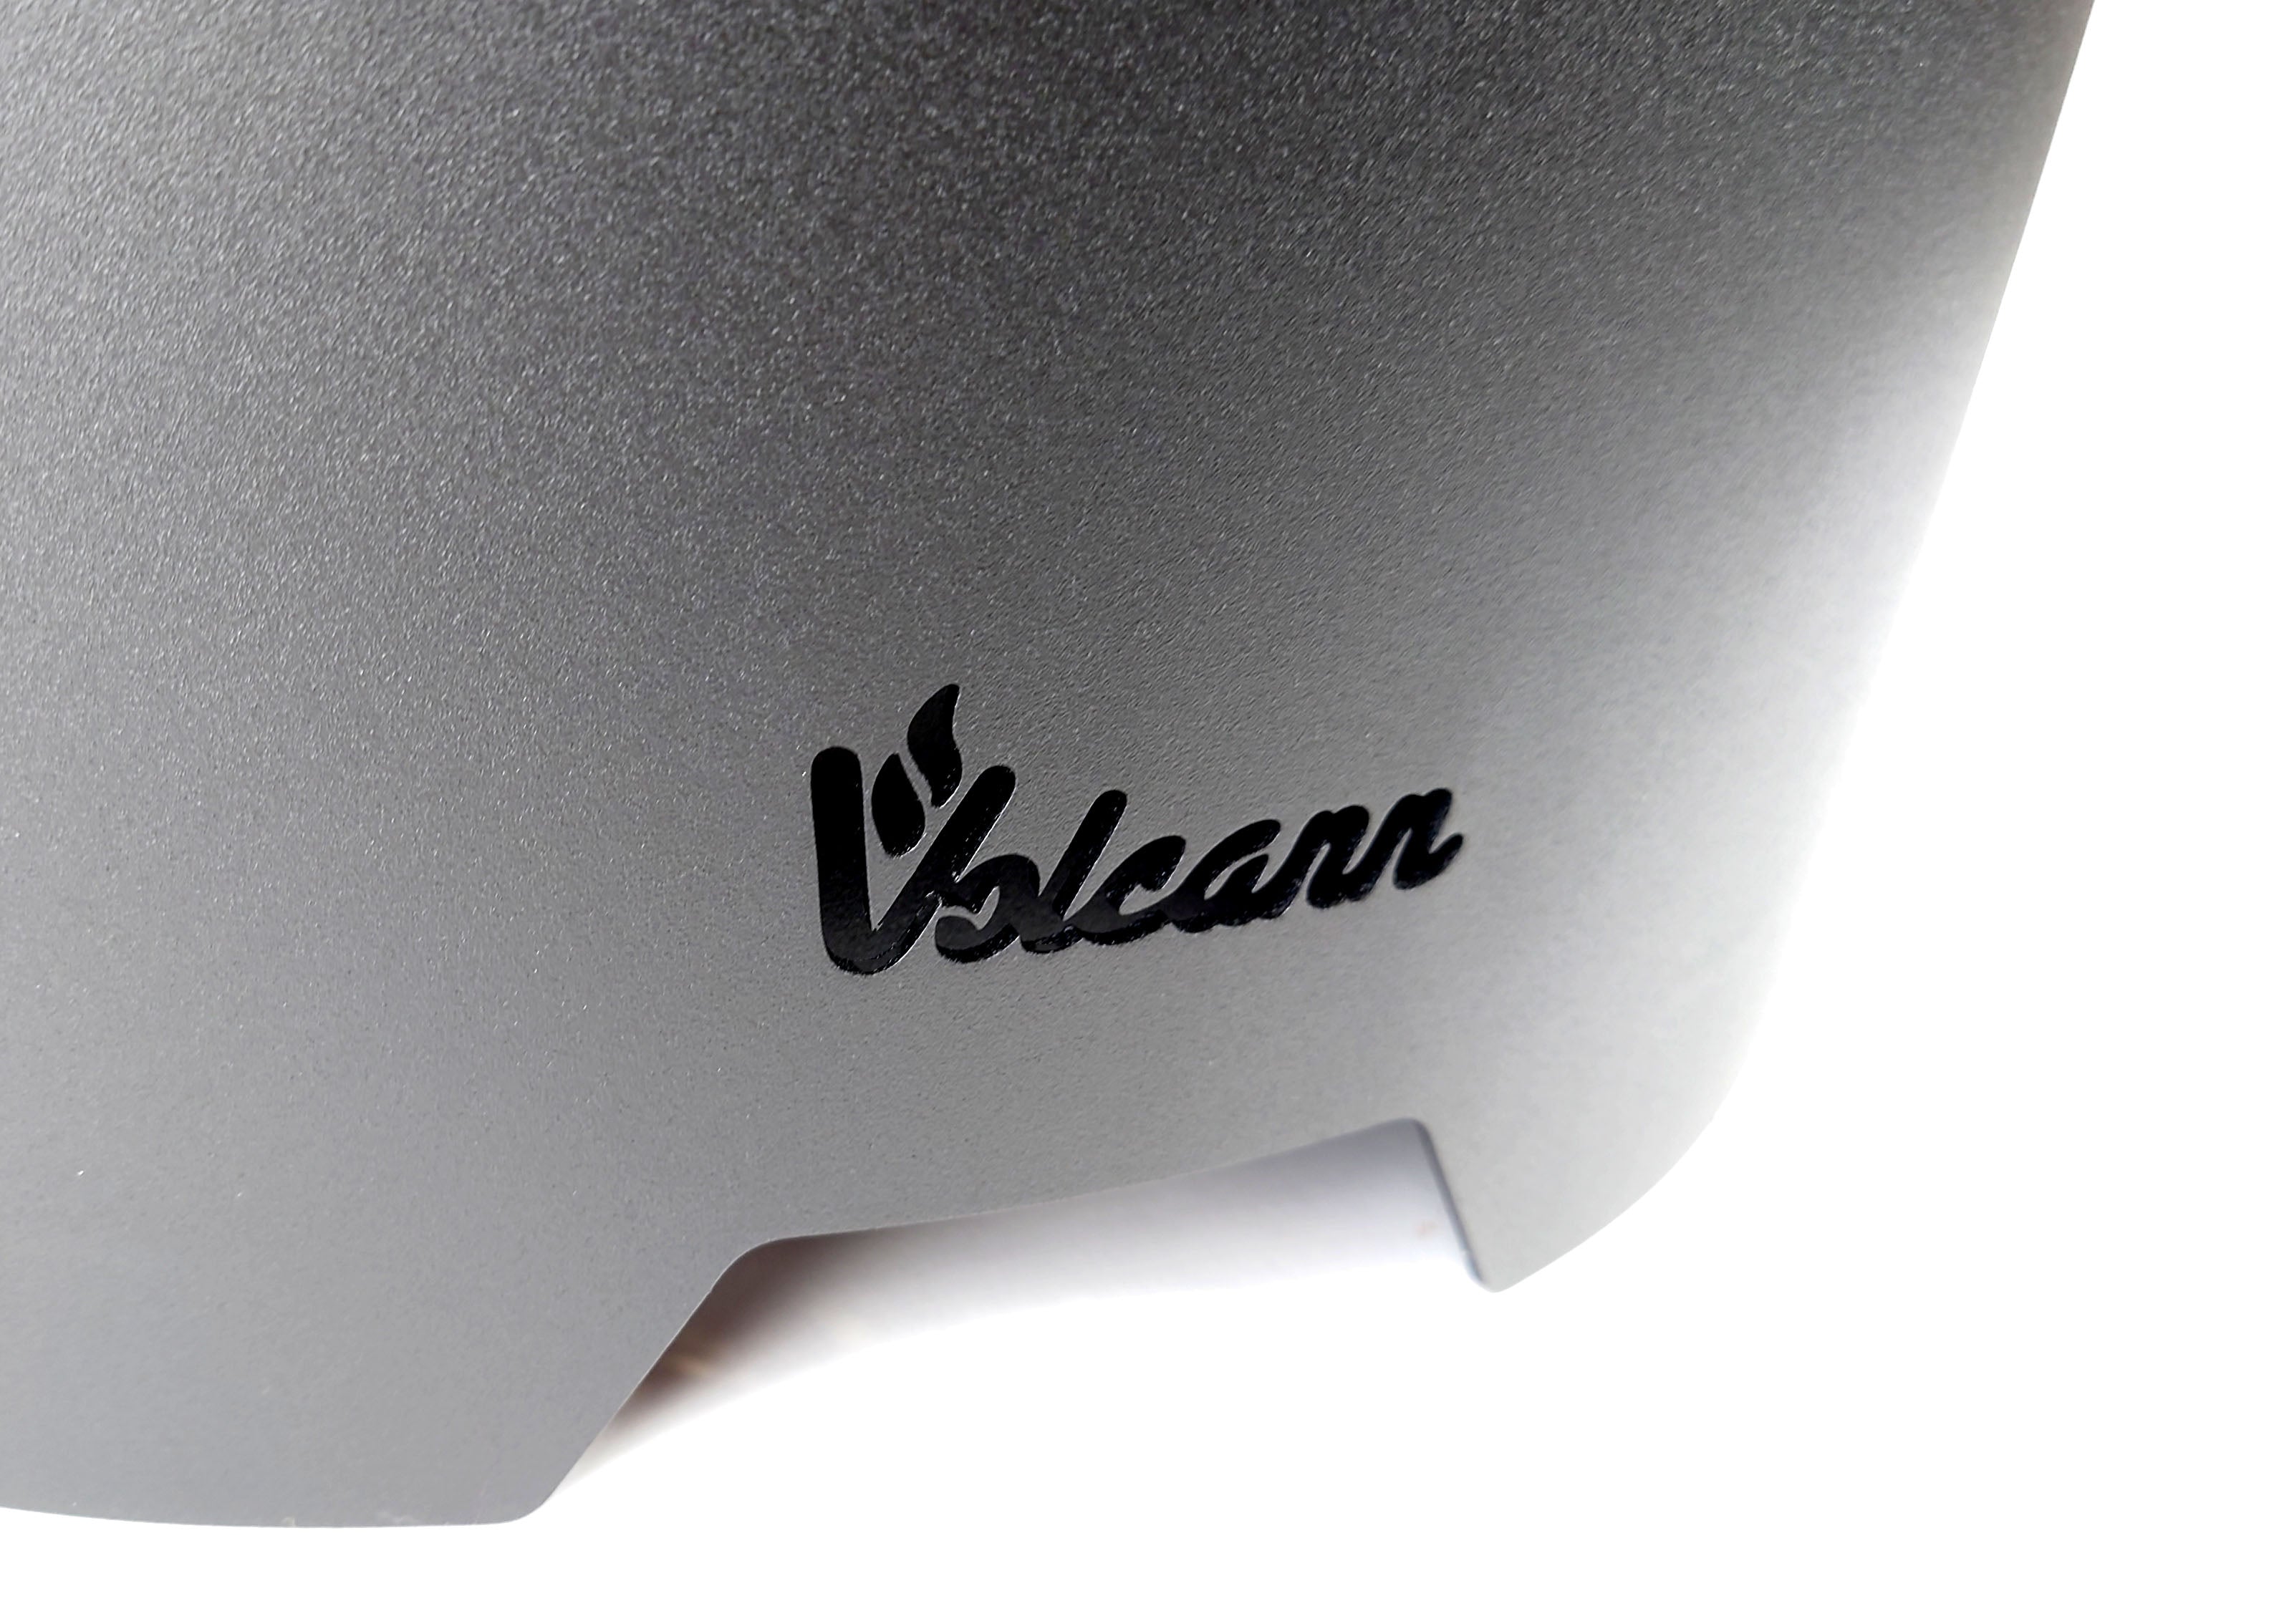 Volcann™ Smoke Free Fire Pit - Indoor Outdoors